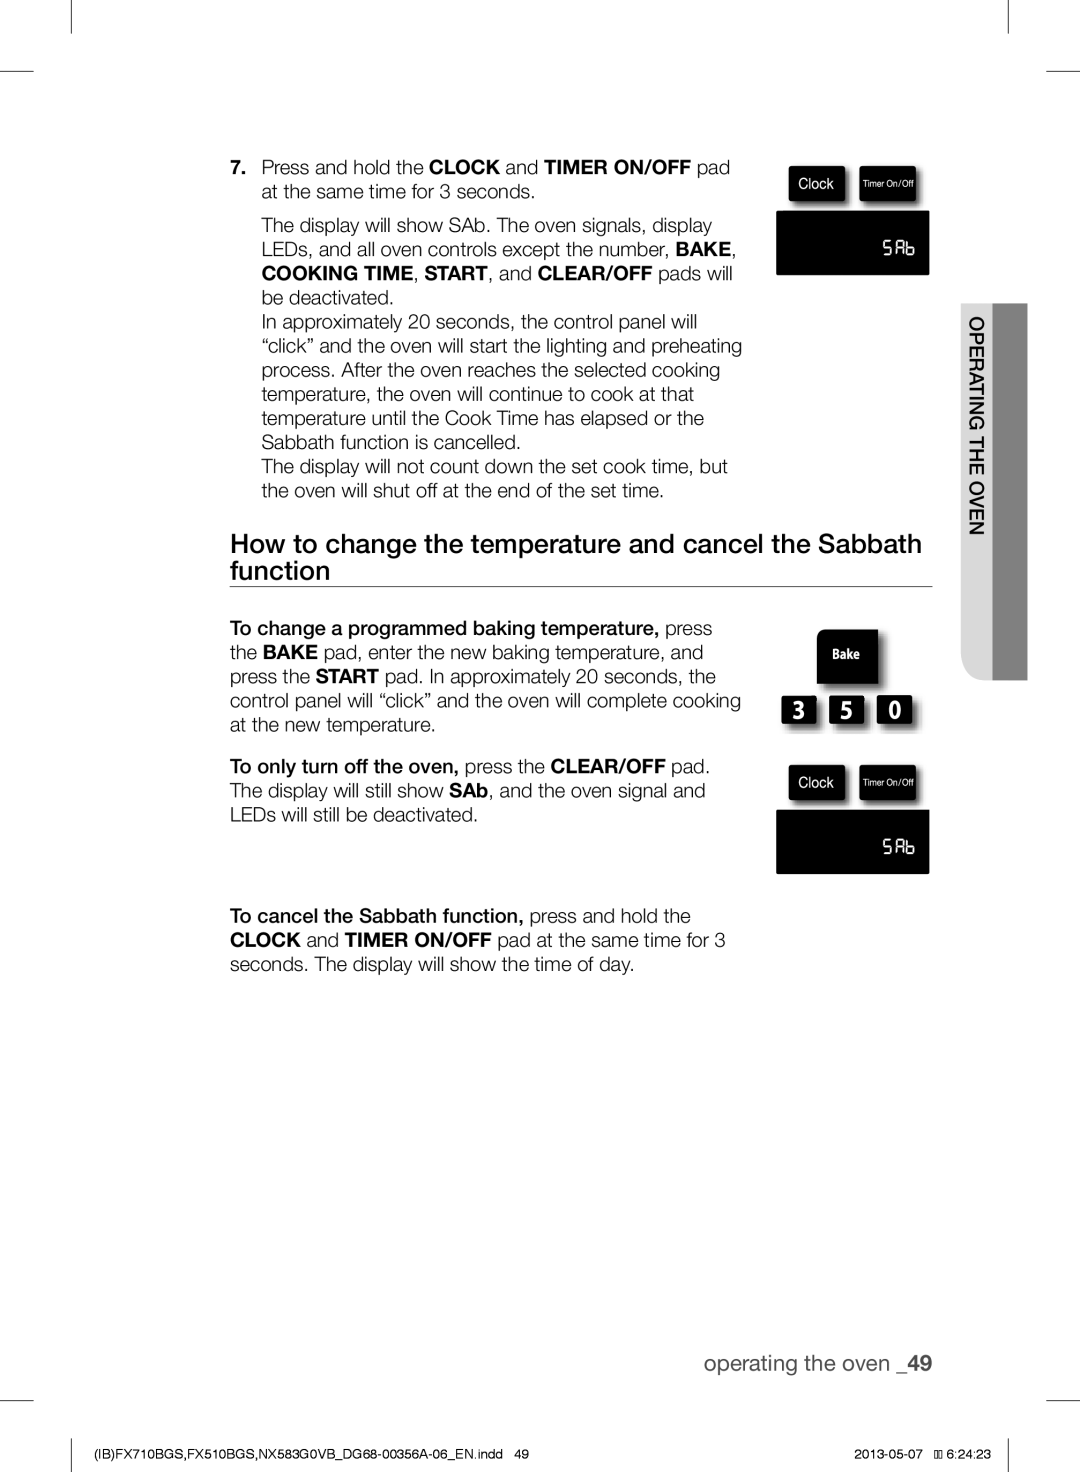 Samsung NX583GOVBWWPKG, NX583GOVBBB How to change the temperature and cancel the Sabbath function, operating the oven 